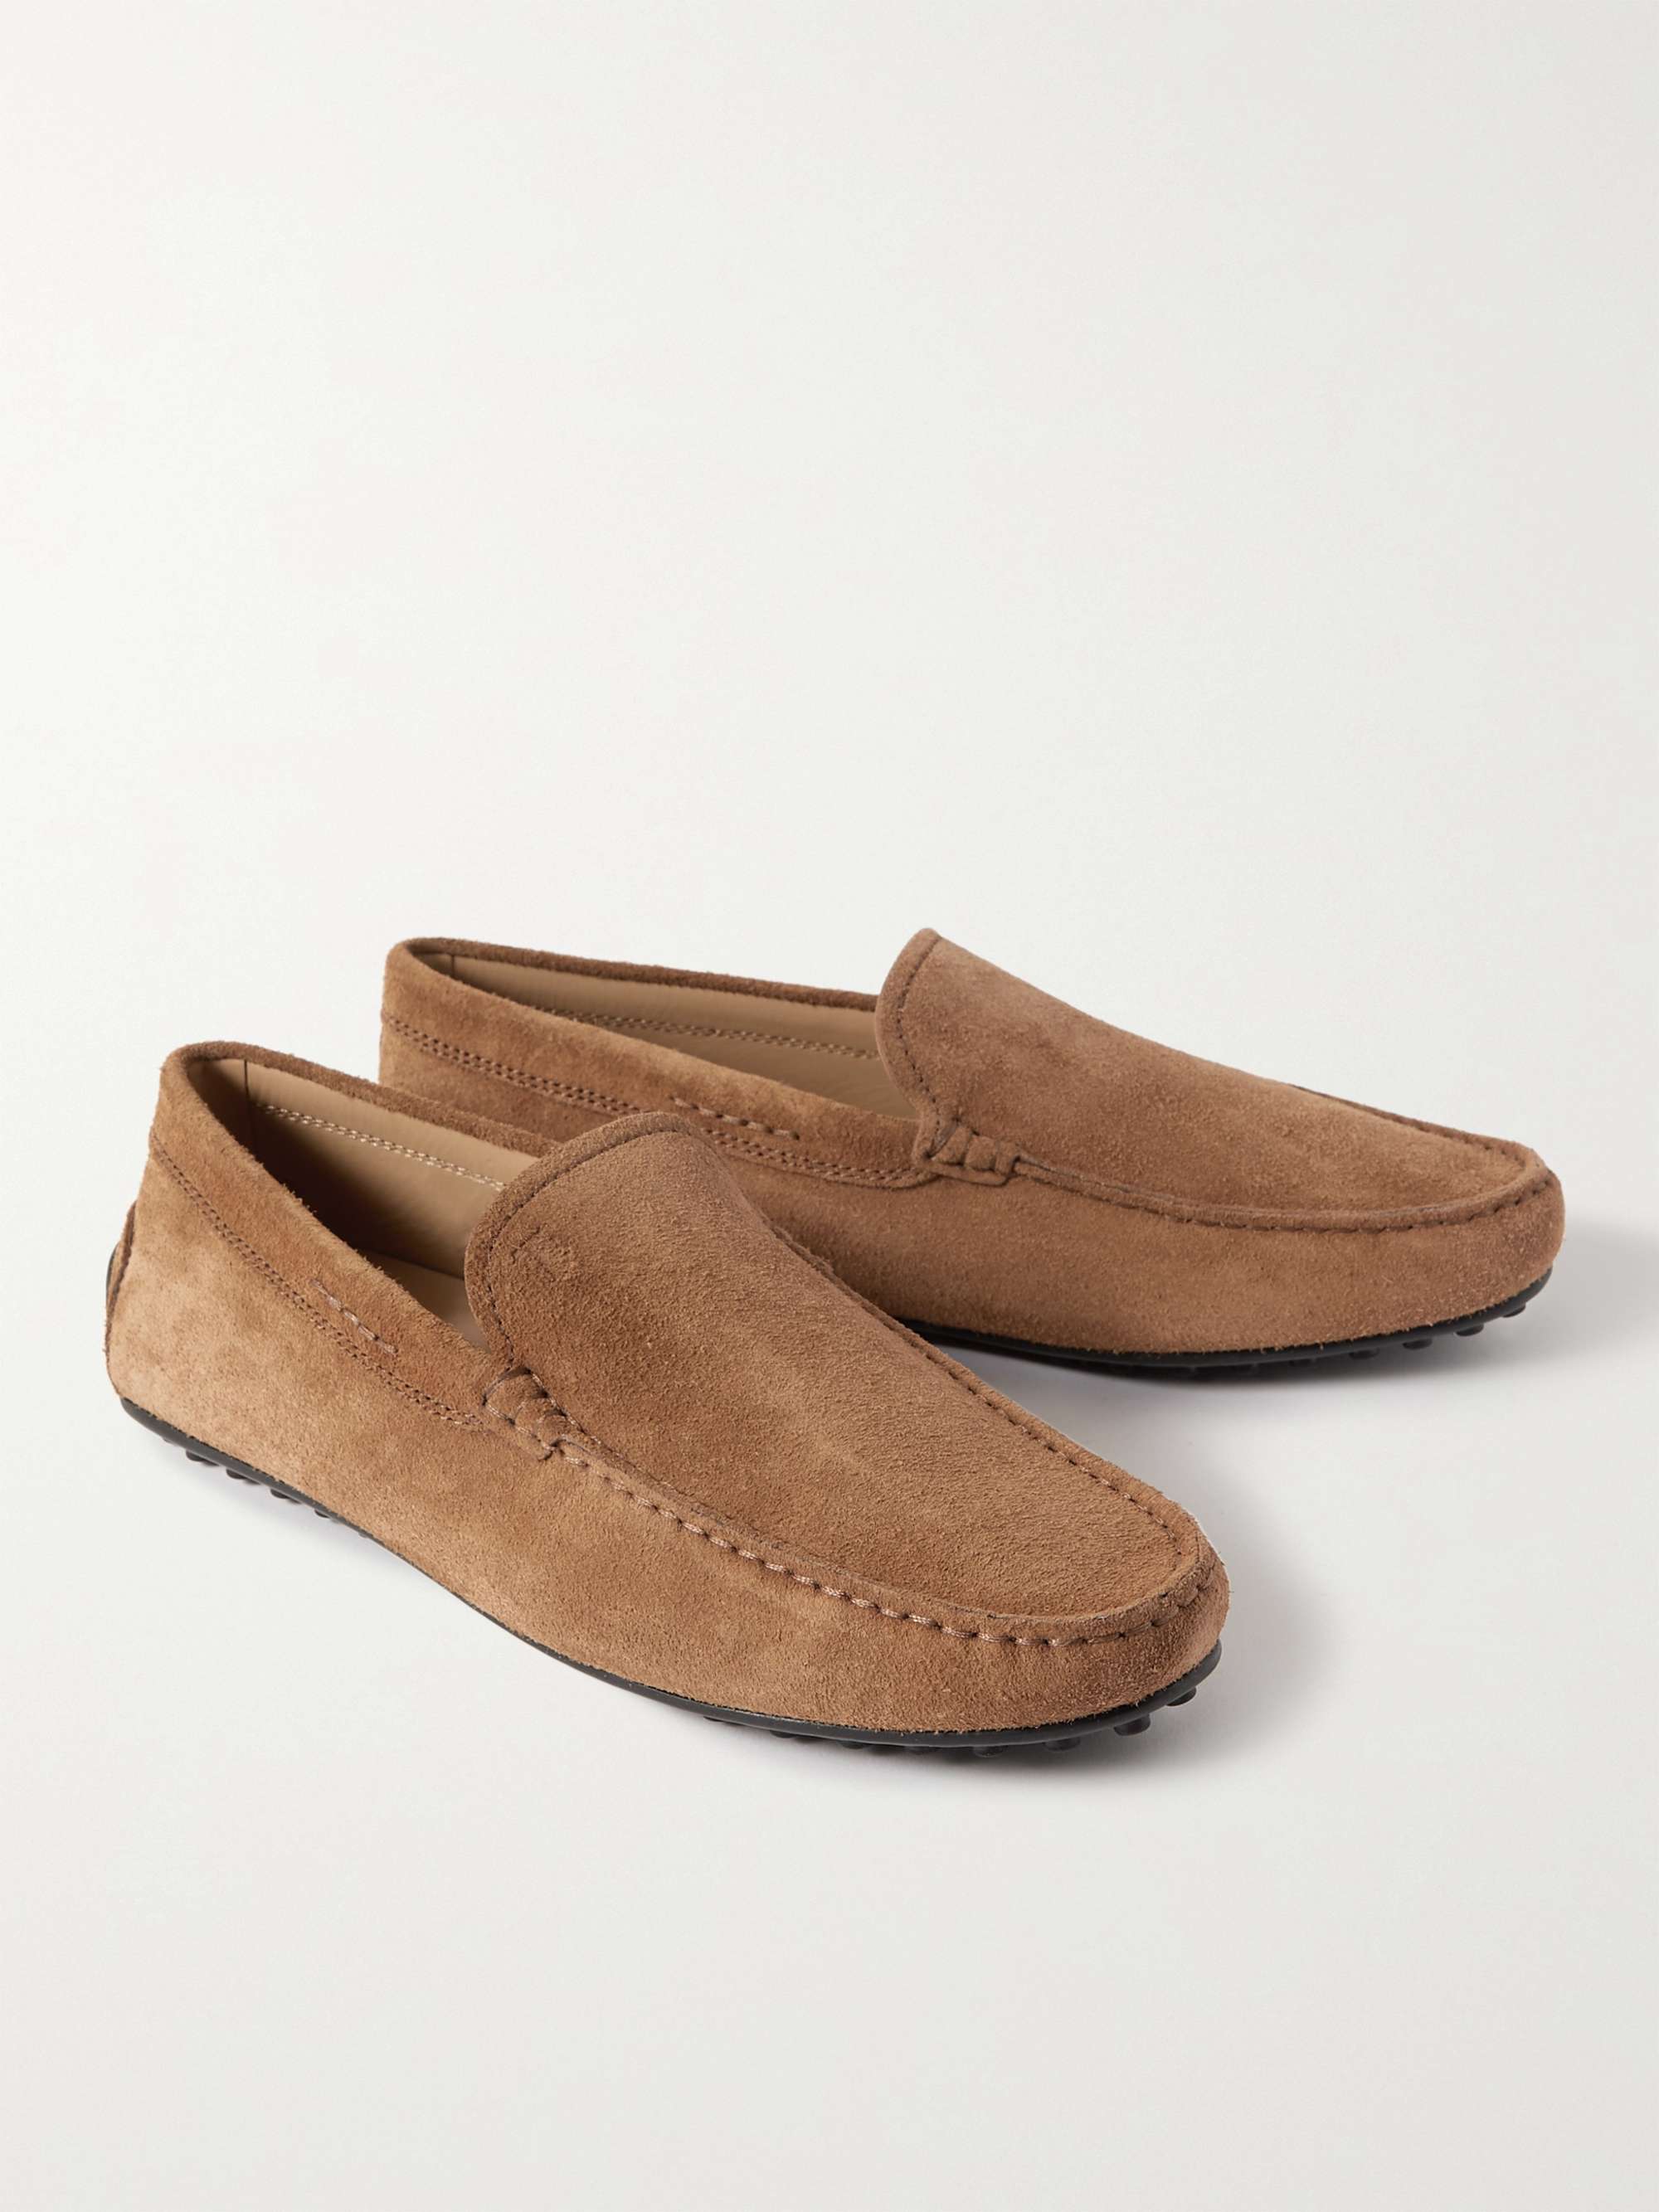 TOD'S Pantofola City Gommino Suede Driving Shoes